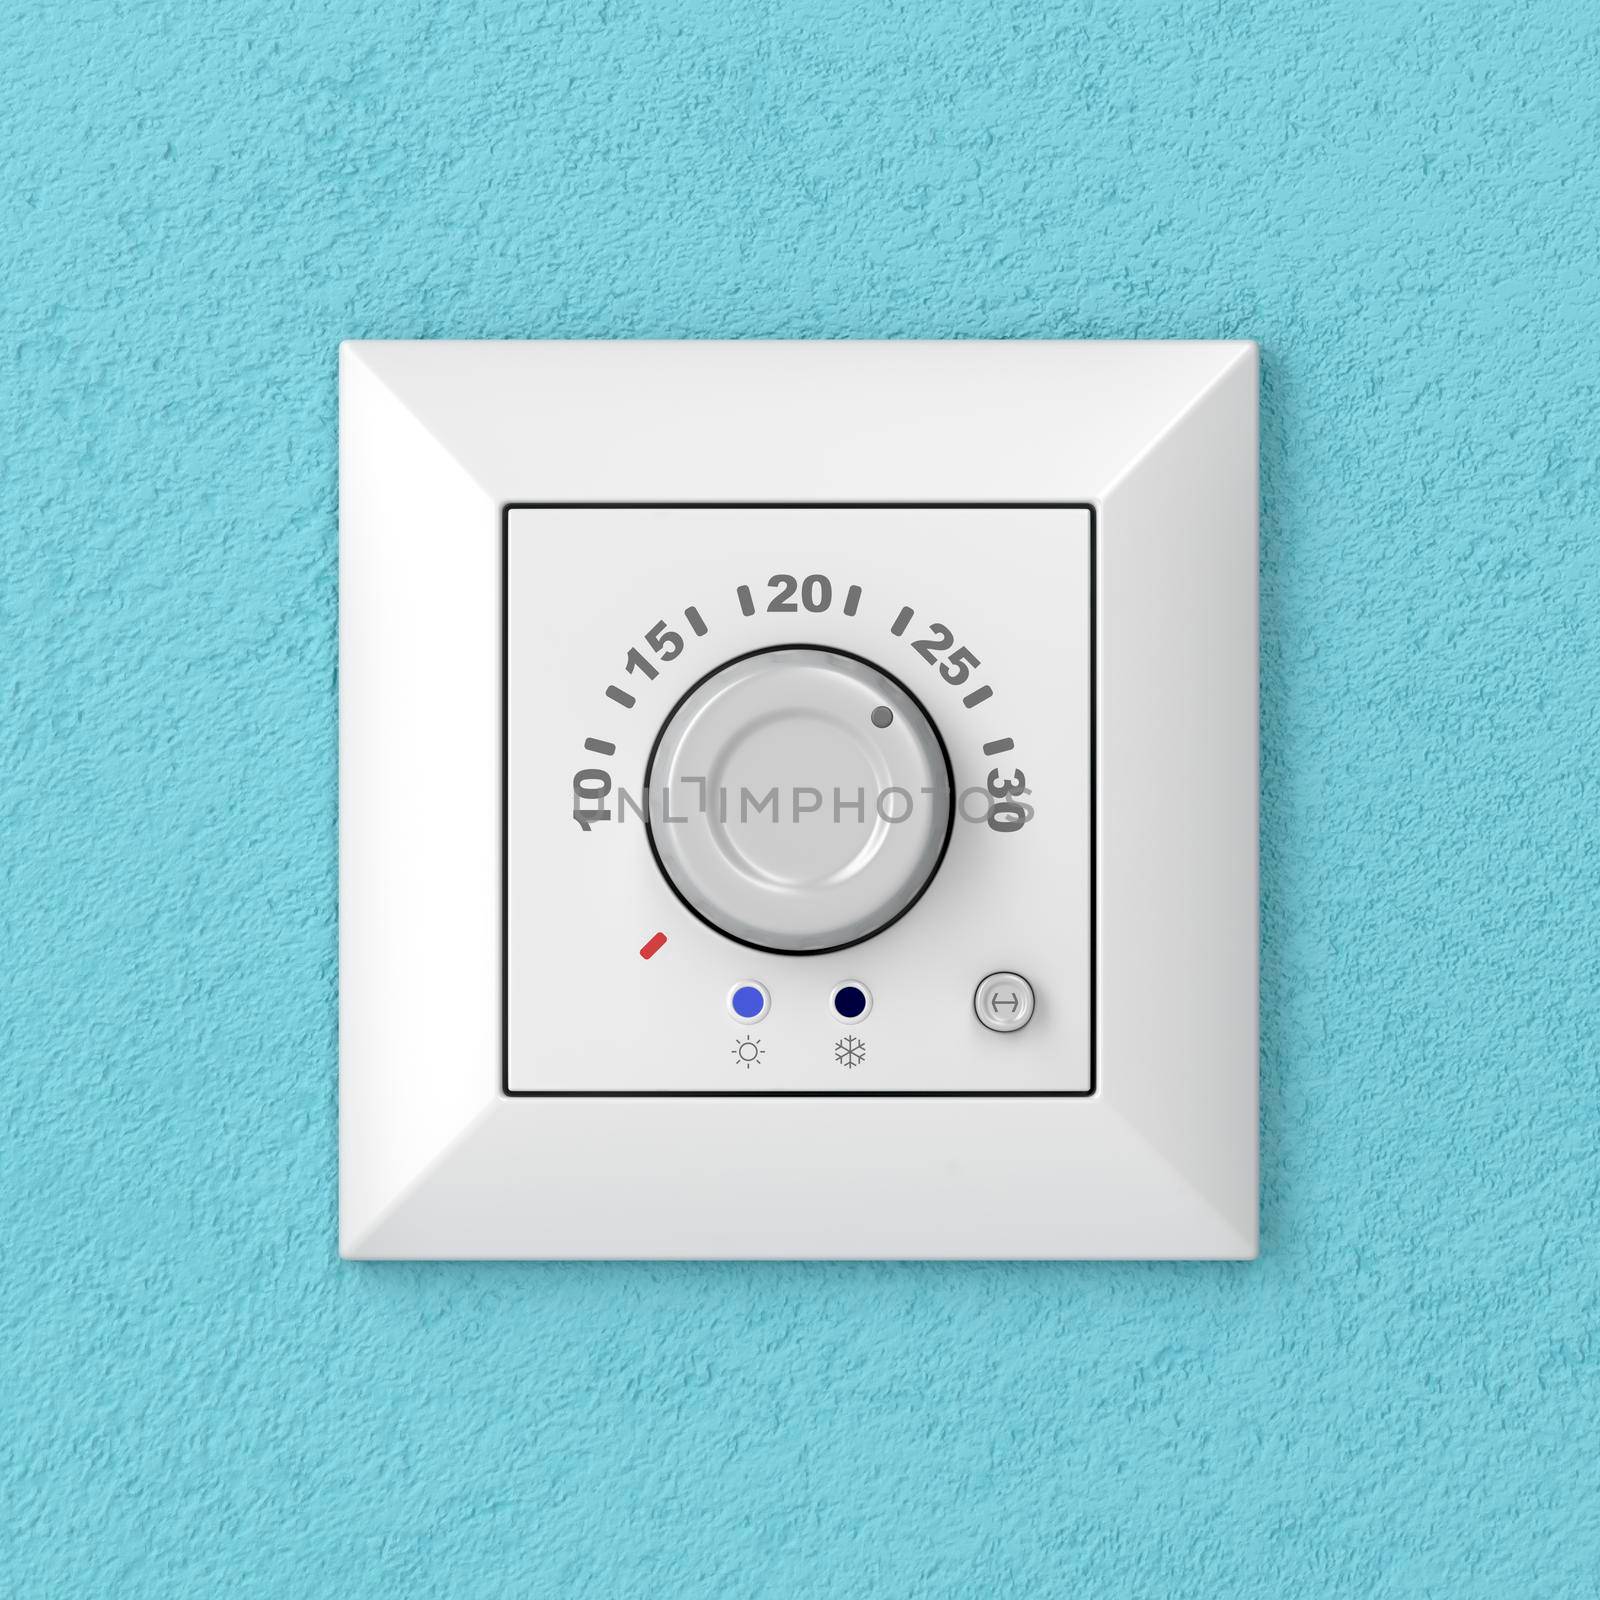 Air conditioner control panel (thermostat) on blue wall, front view